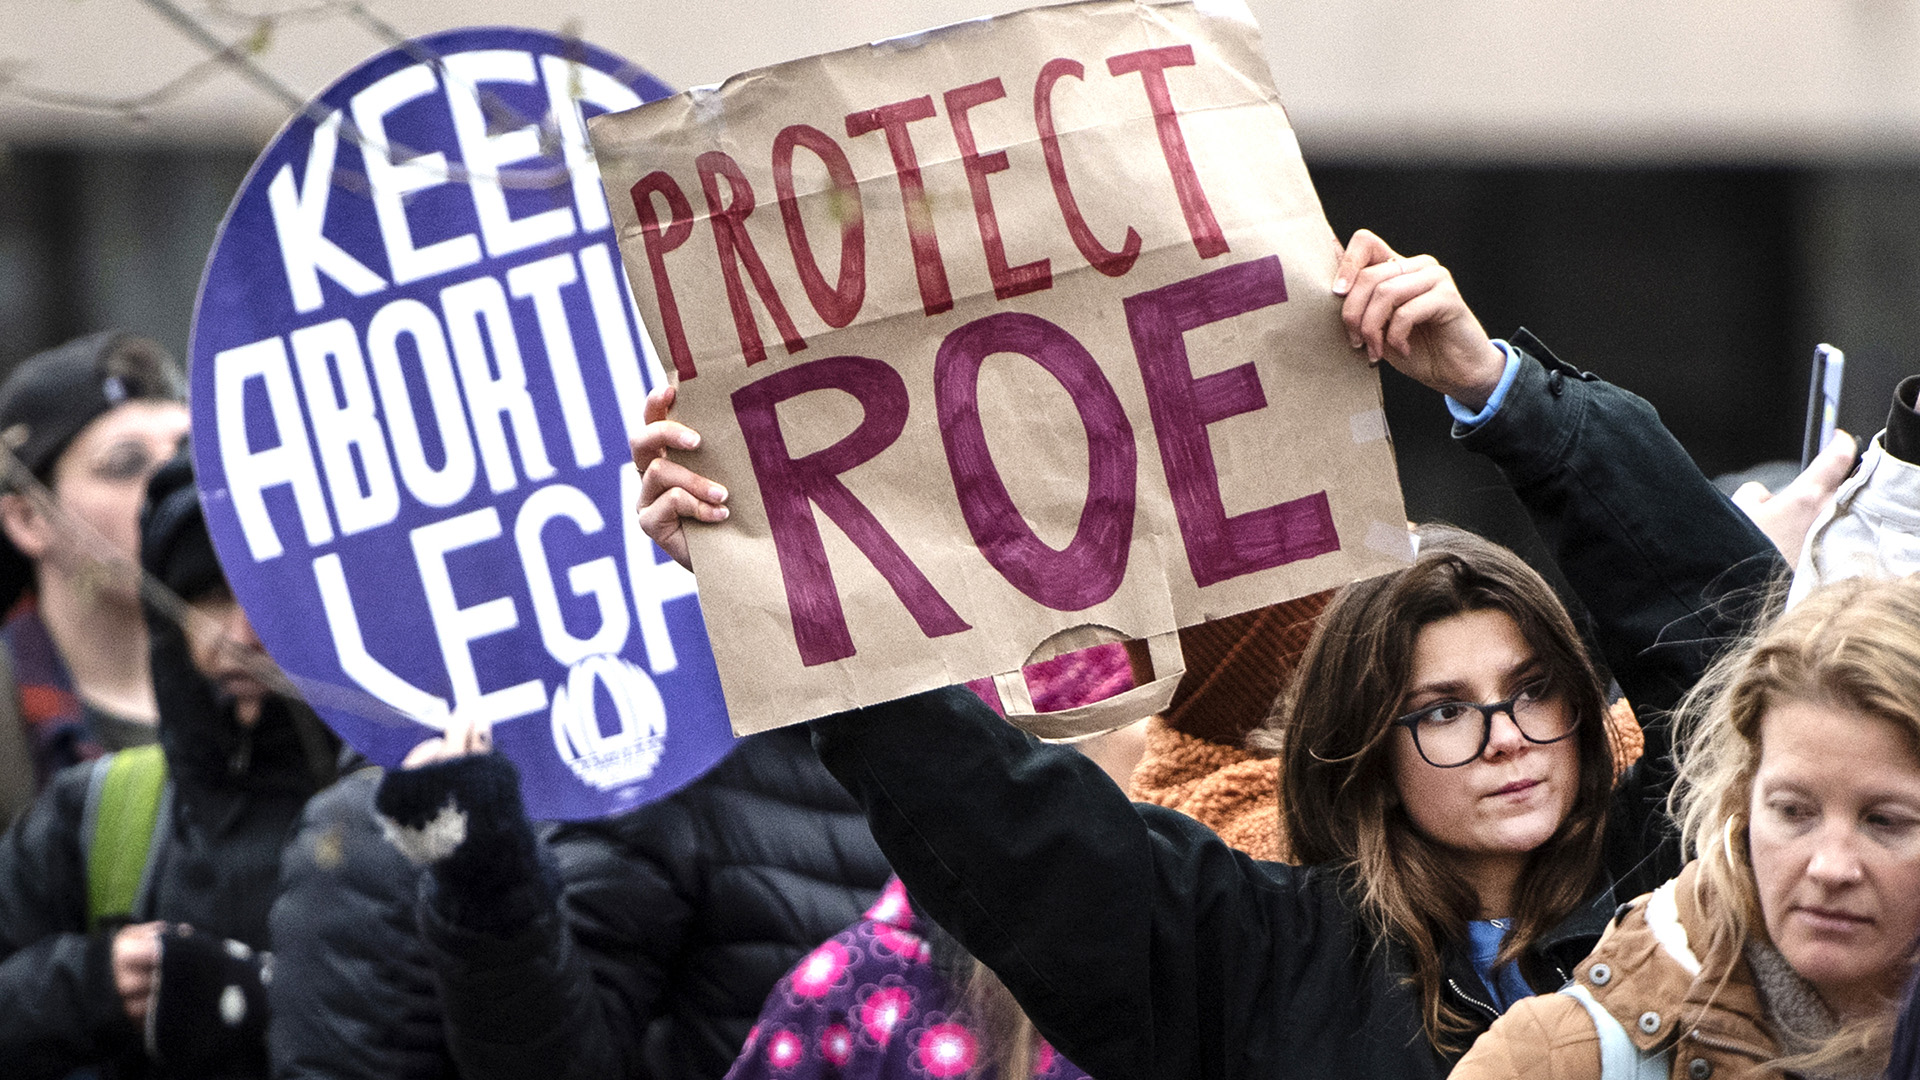 Protestors hold signs that read "Keep Abortion Legal" and "Protect Roe."